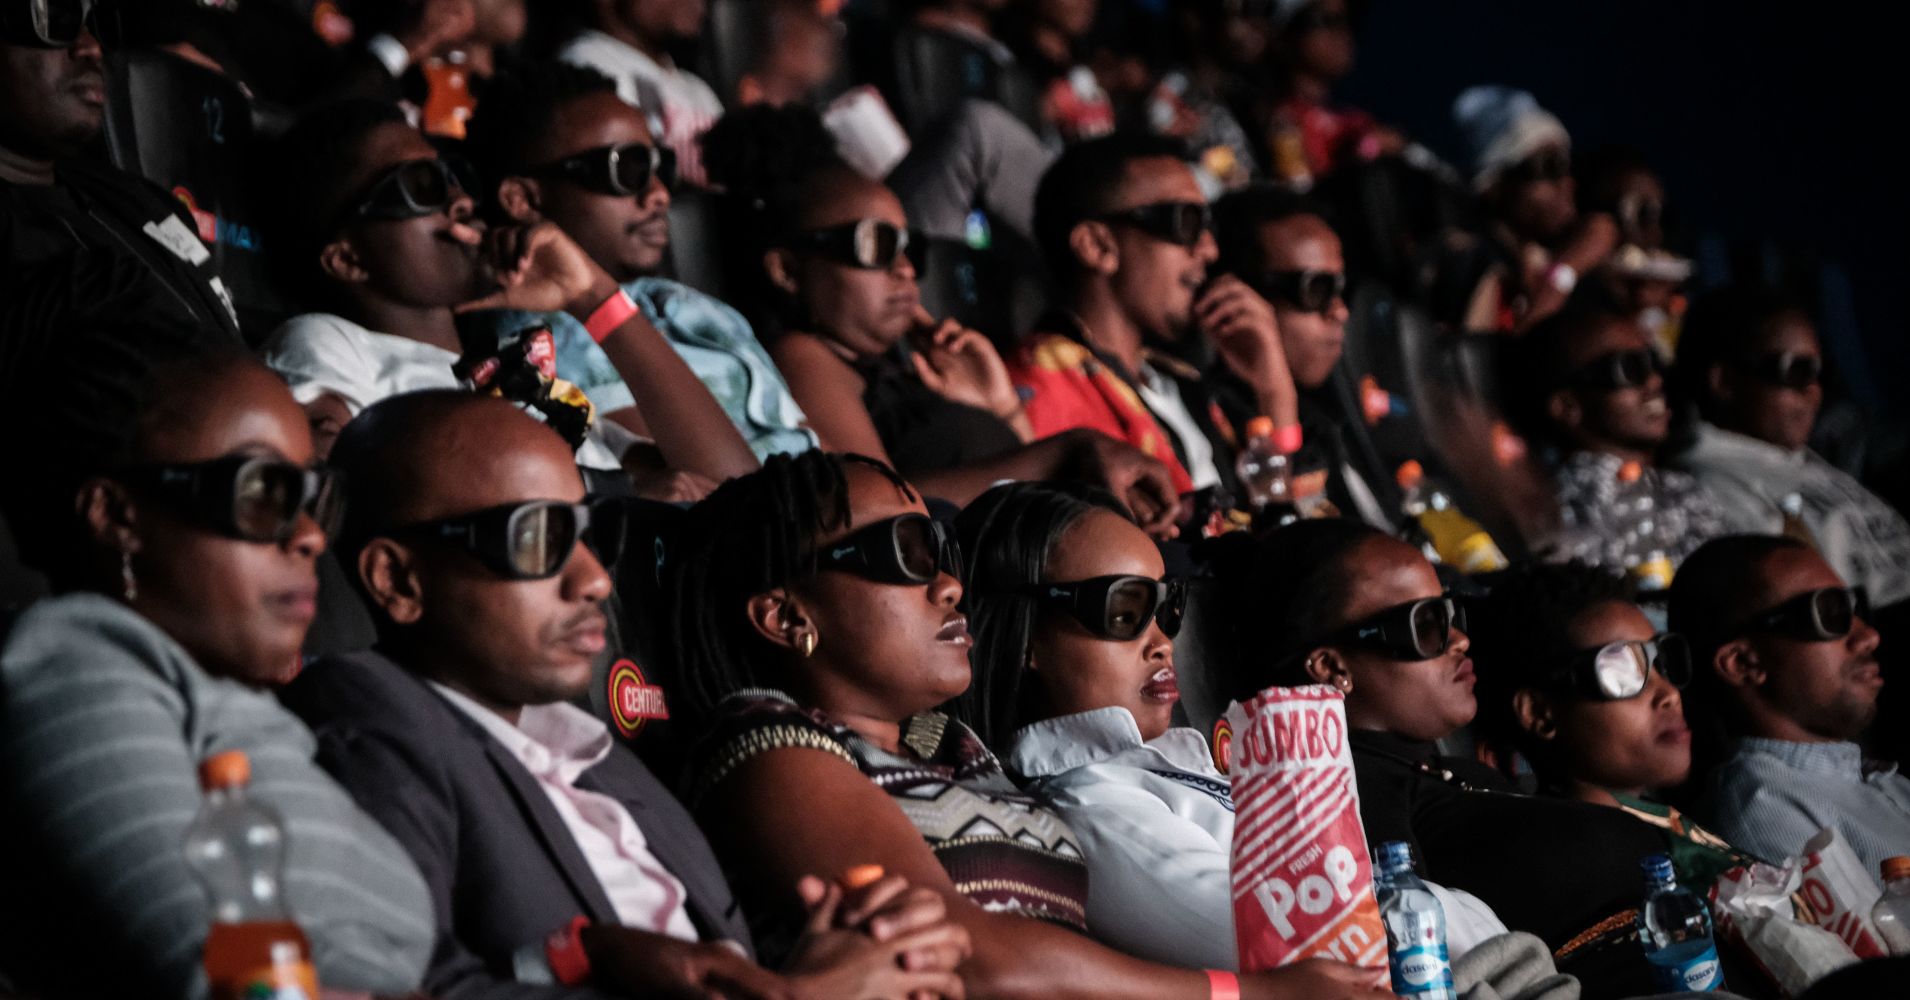 Invited guests watch the film "Black Panther" in 3D which featuring Oscar-winning Mexico born Kenyan actress Lupita Nyongo during Movie Jabbers Black Panther Cosplay Screening in Nairobi, Kenya, on February 14, 2018.